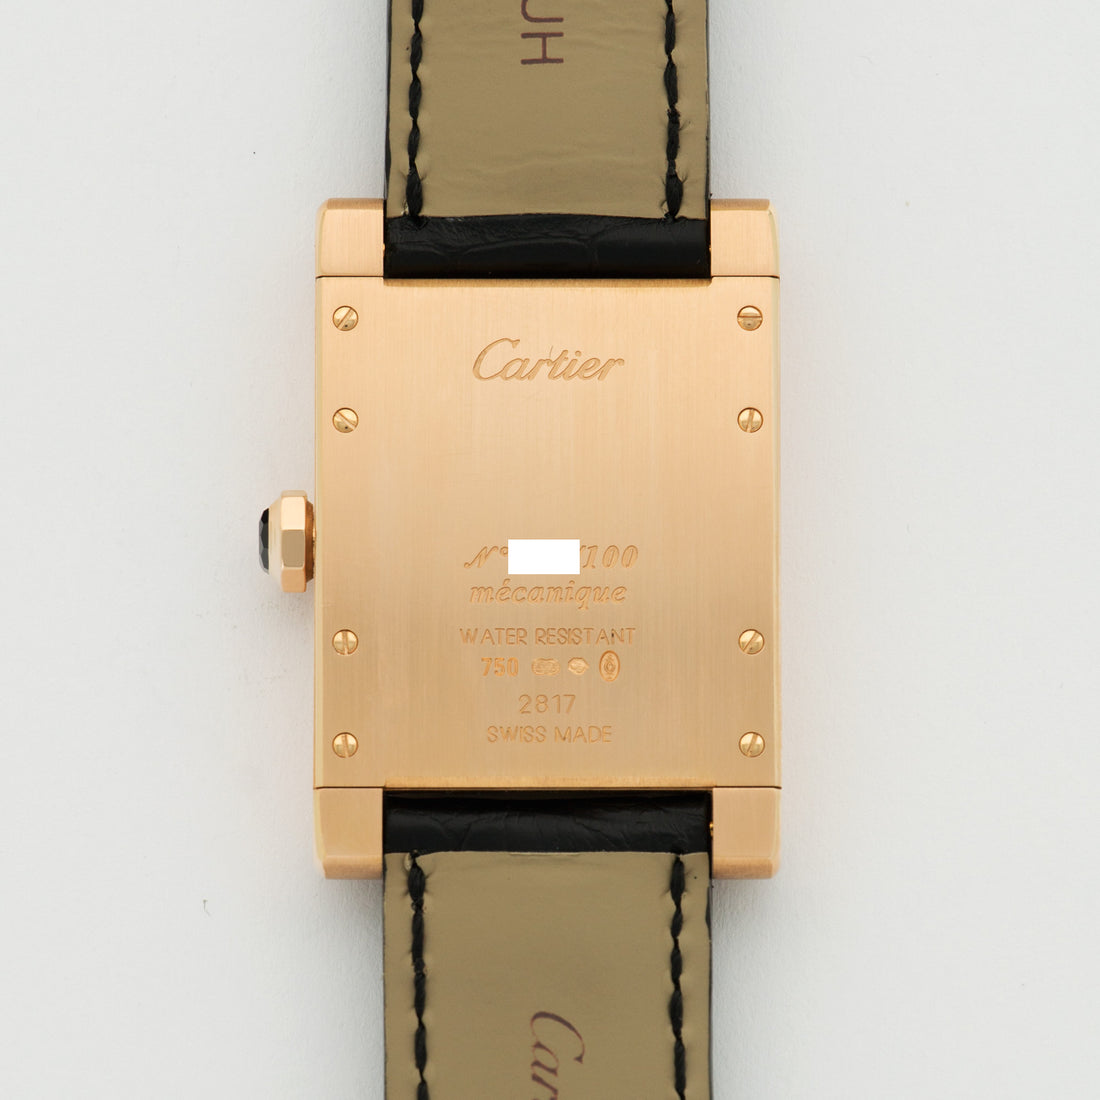 Authentic Used Cartier Tank Louis Large WGTA0011 Watch (10-10-CAR